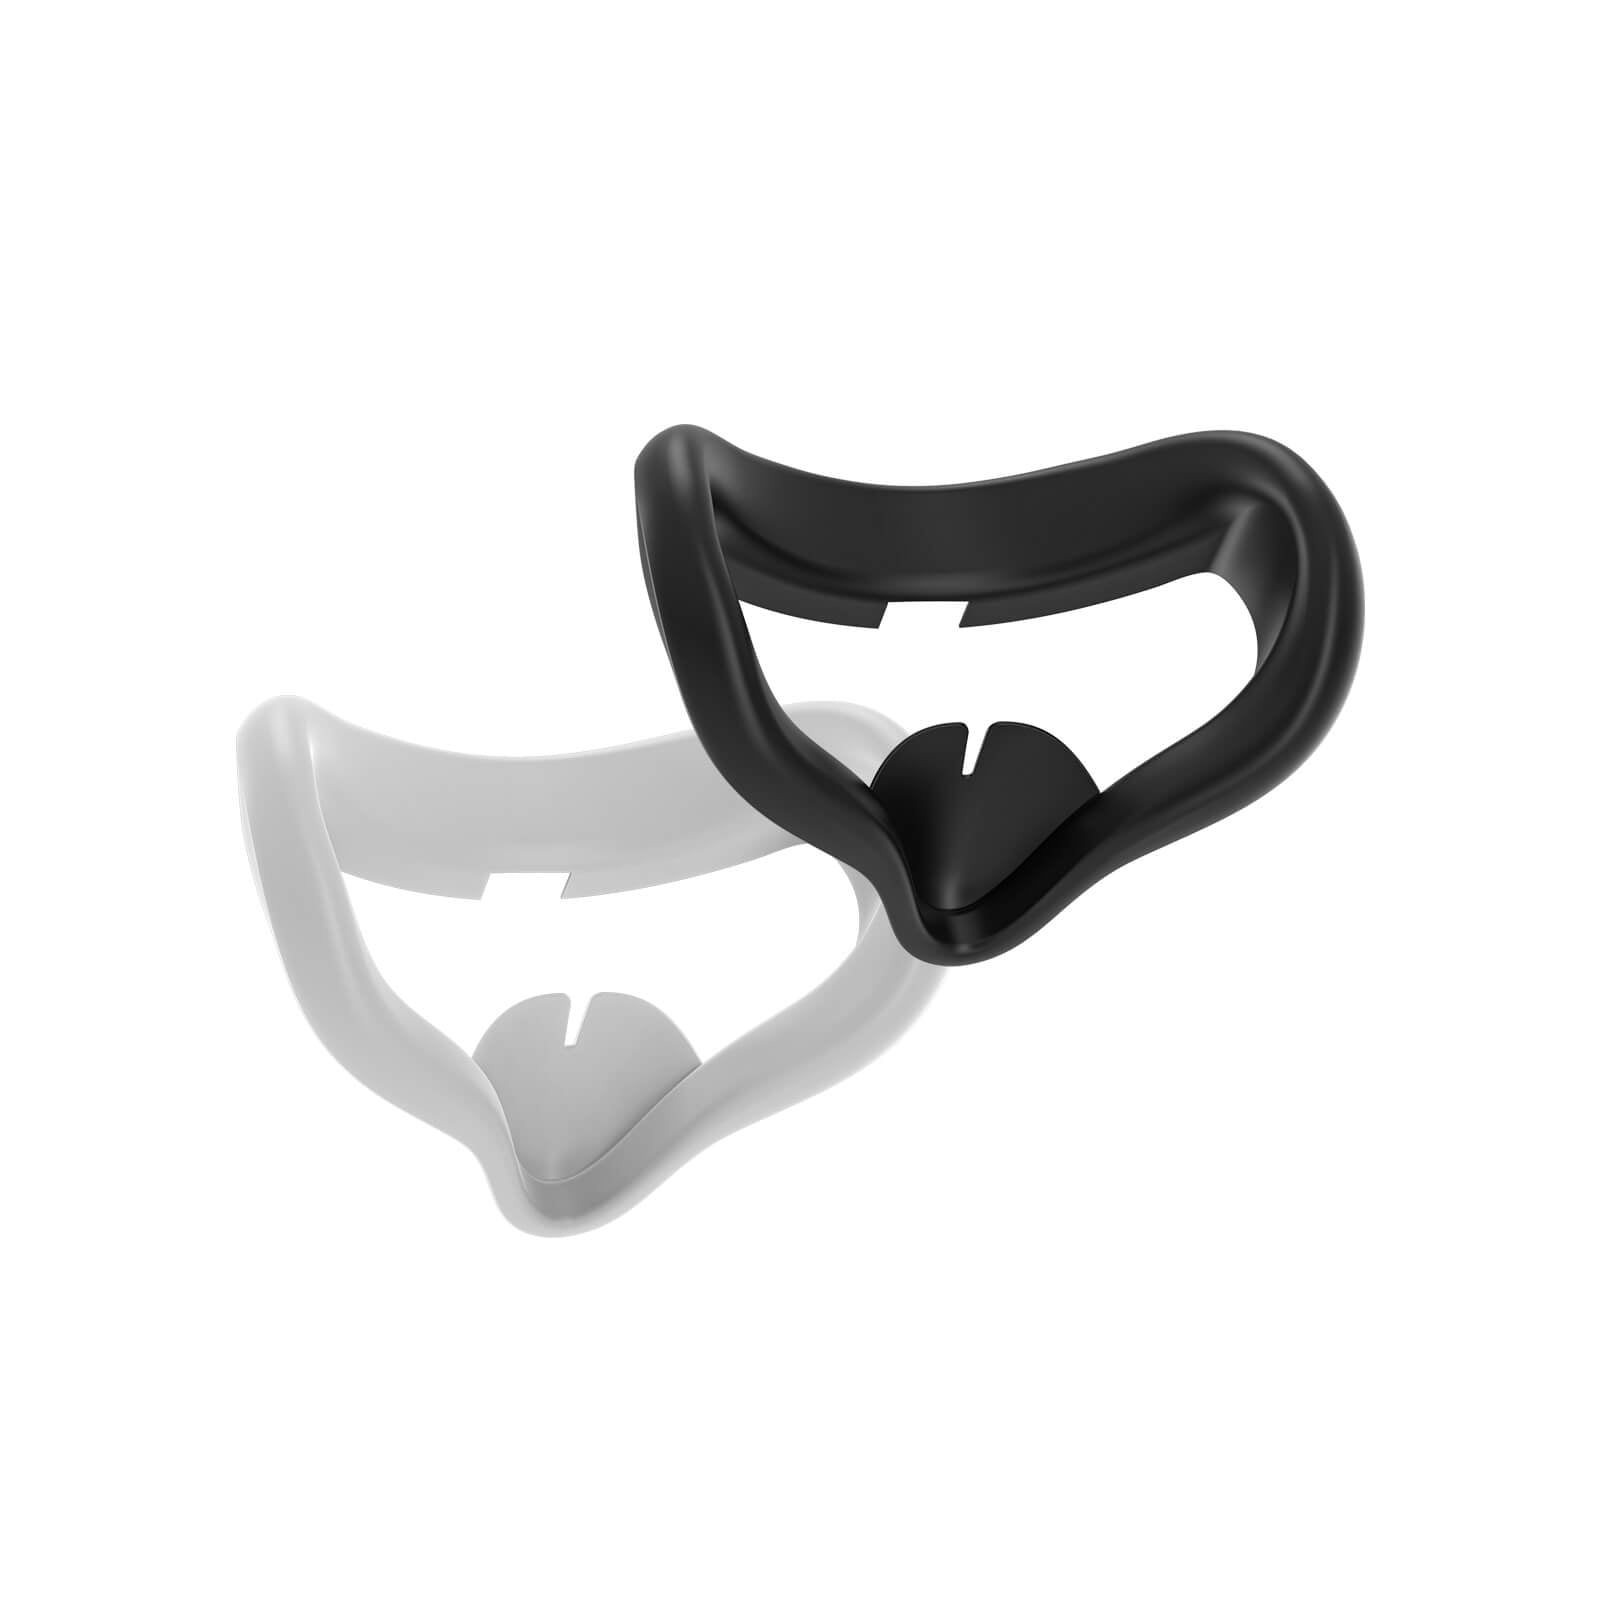 ZyberVR Quest 2 Silicone Face Cover